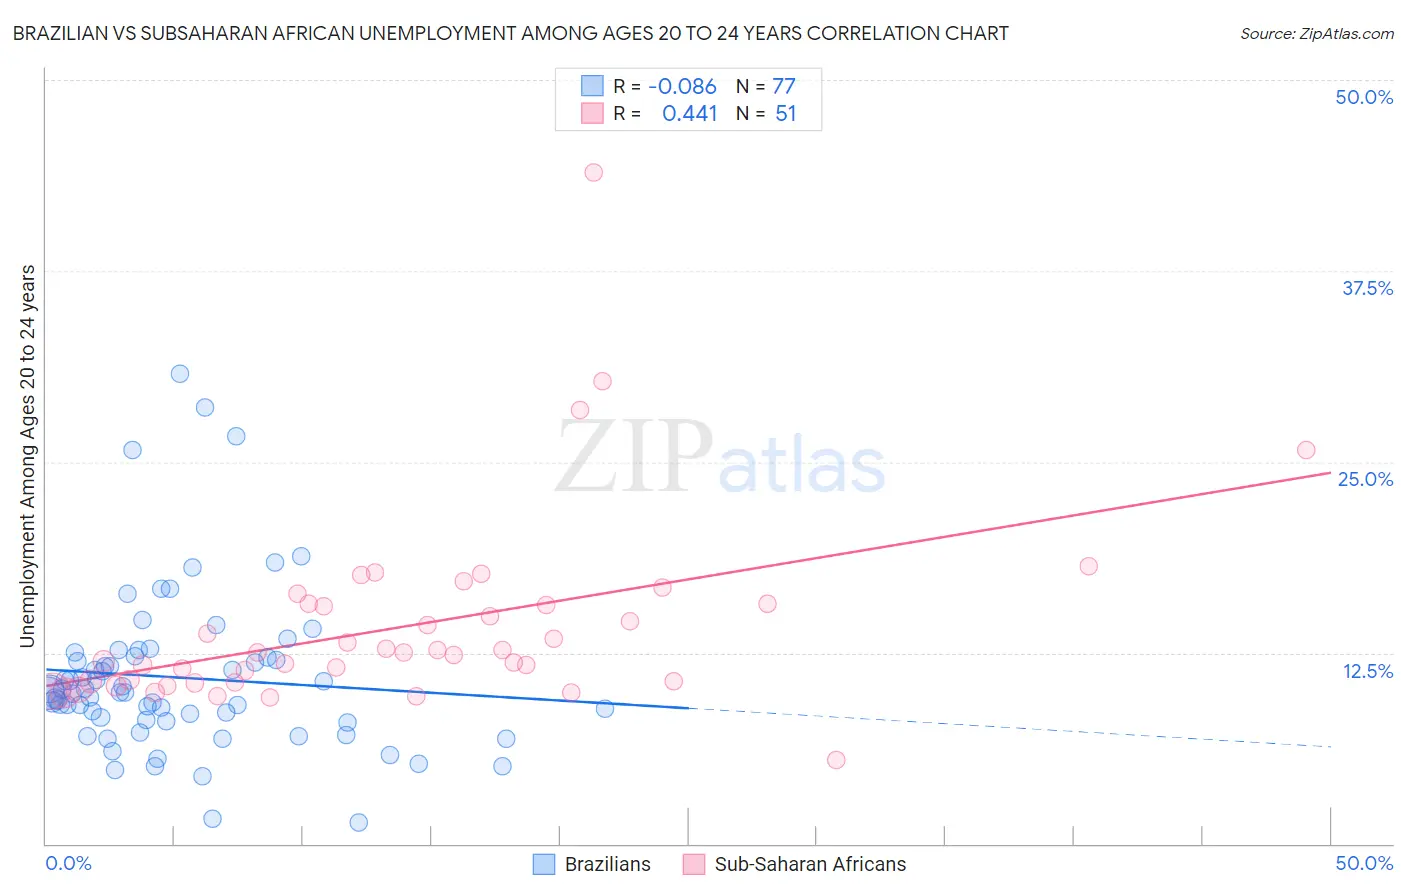 Brazilian vs Subsaharan African Unemployment Among Ages 20 to 24 years